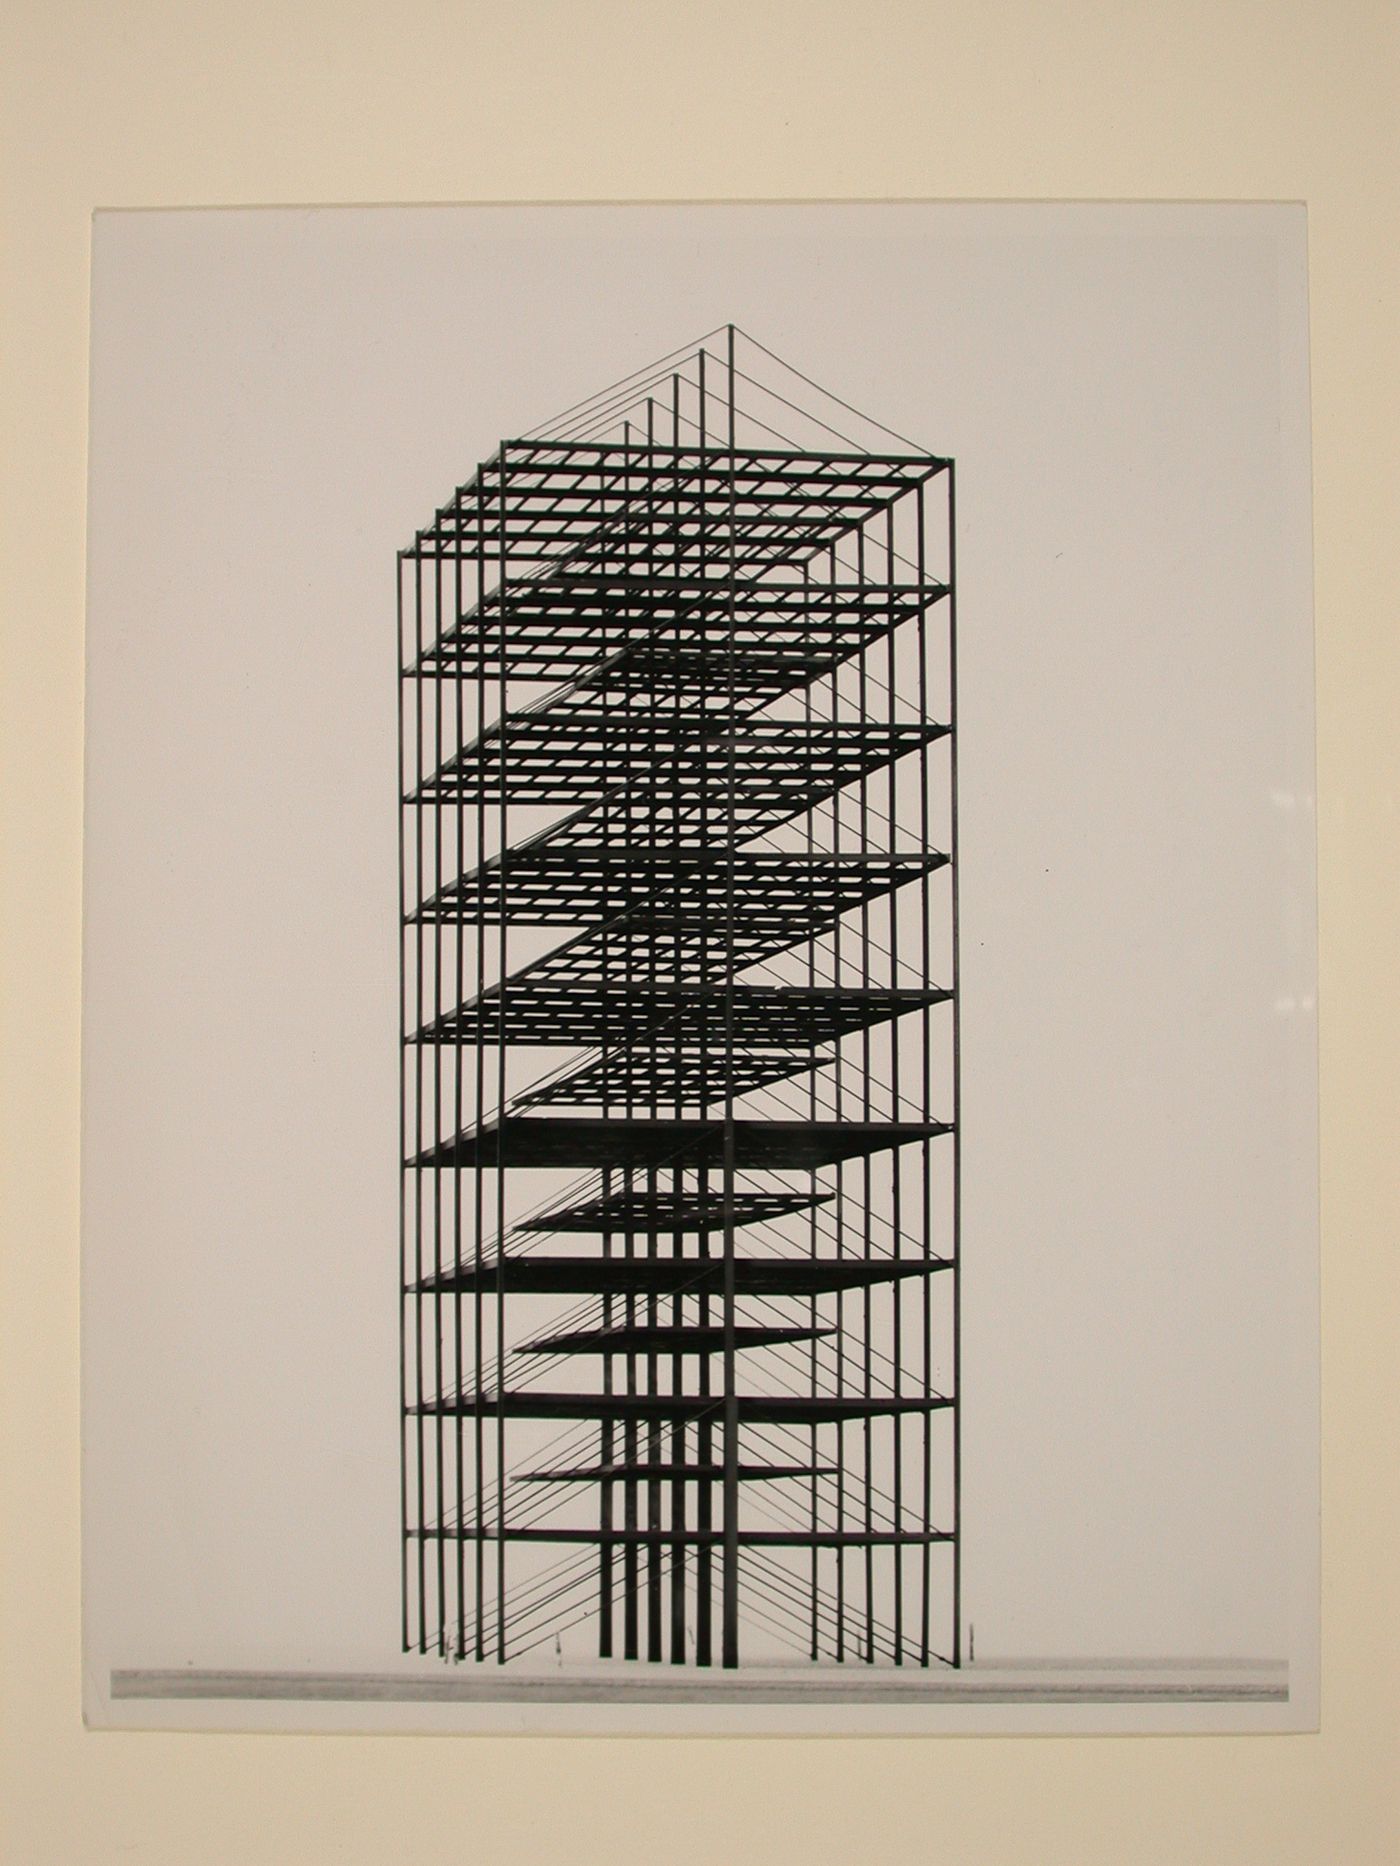 Photograph of a model for a Tall Building Suspension System